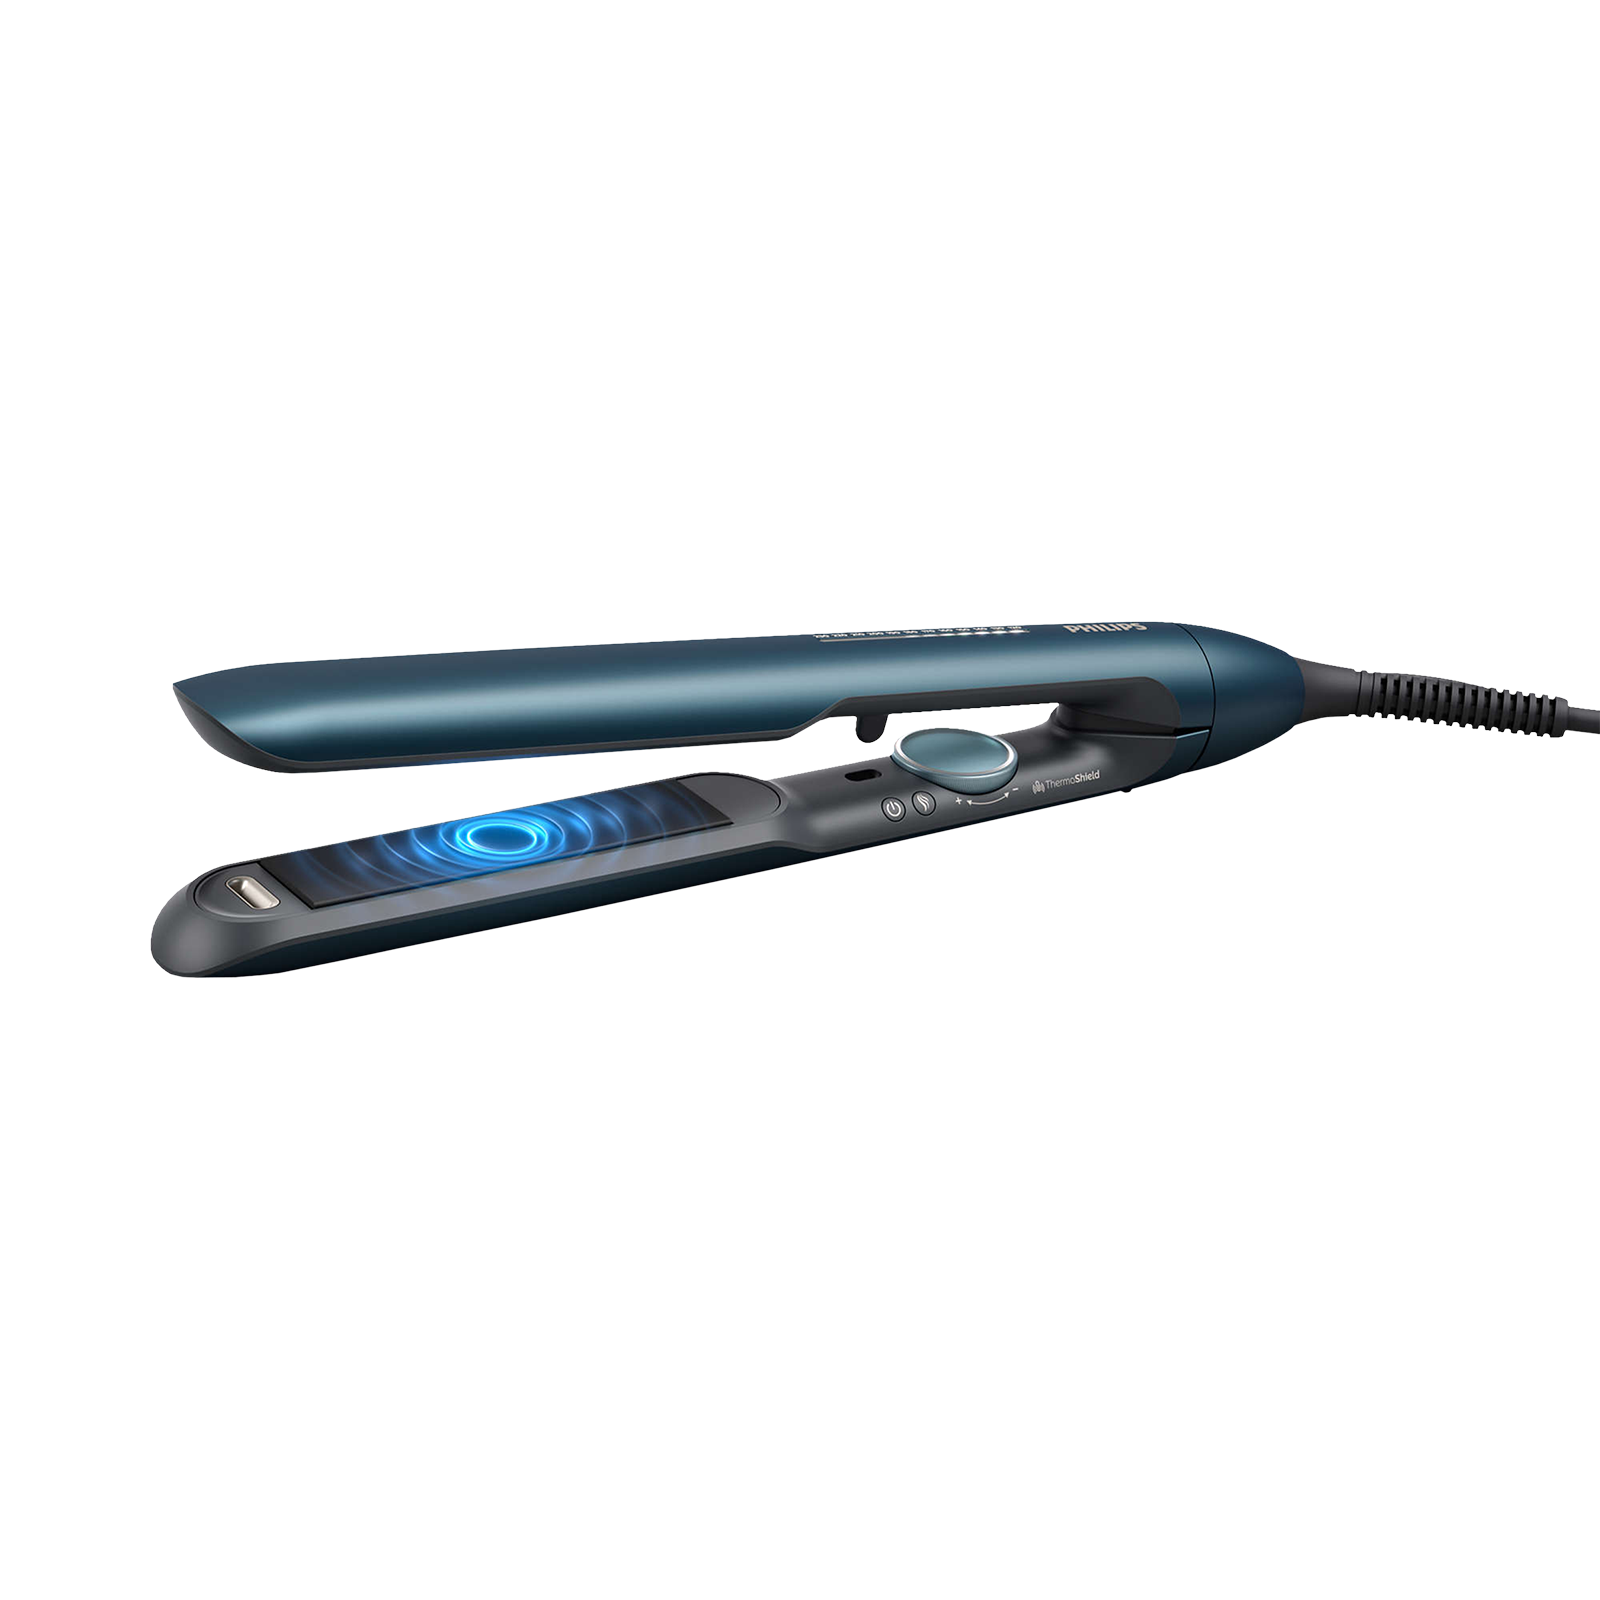 PHILIPS 7000 Series Hair Straightener with ThermoShield Technology (Ceramic Plates, Teal Metallic)